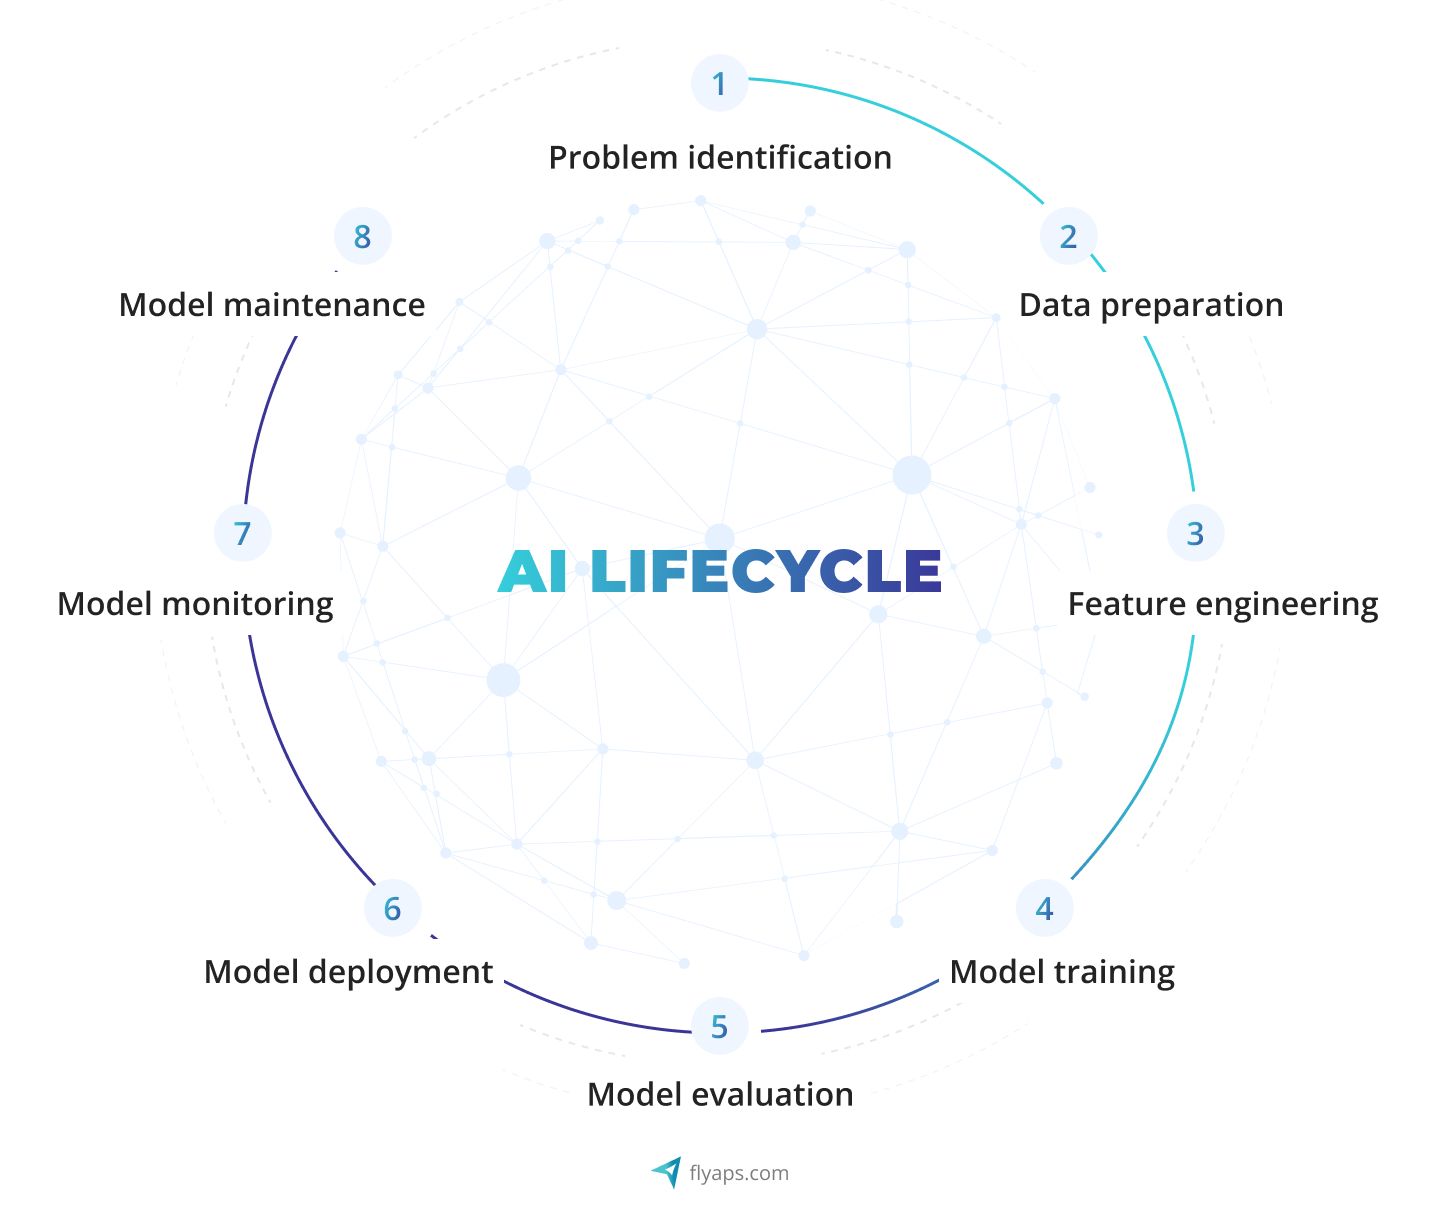 The key stages of the AI project cycle